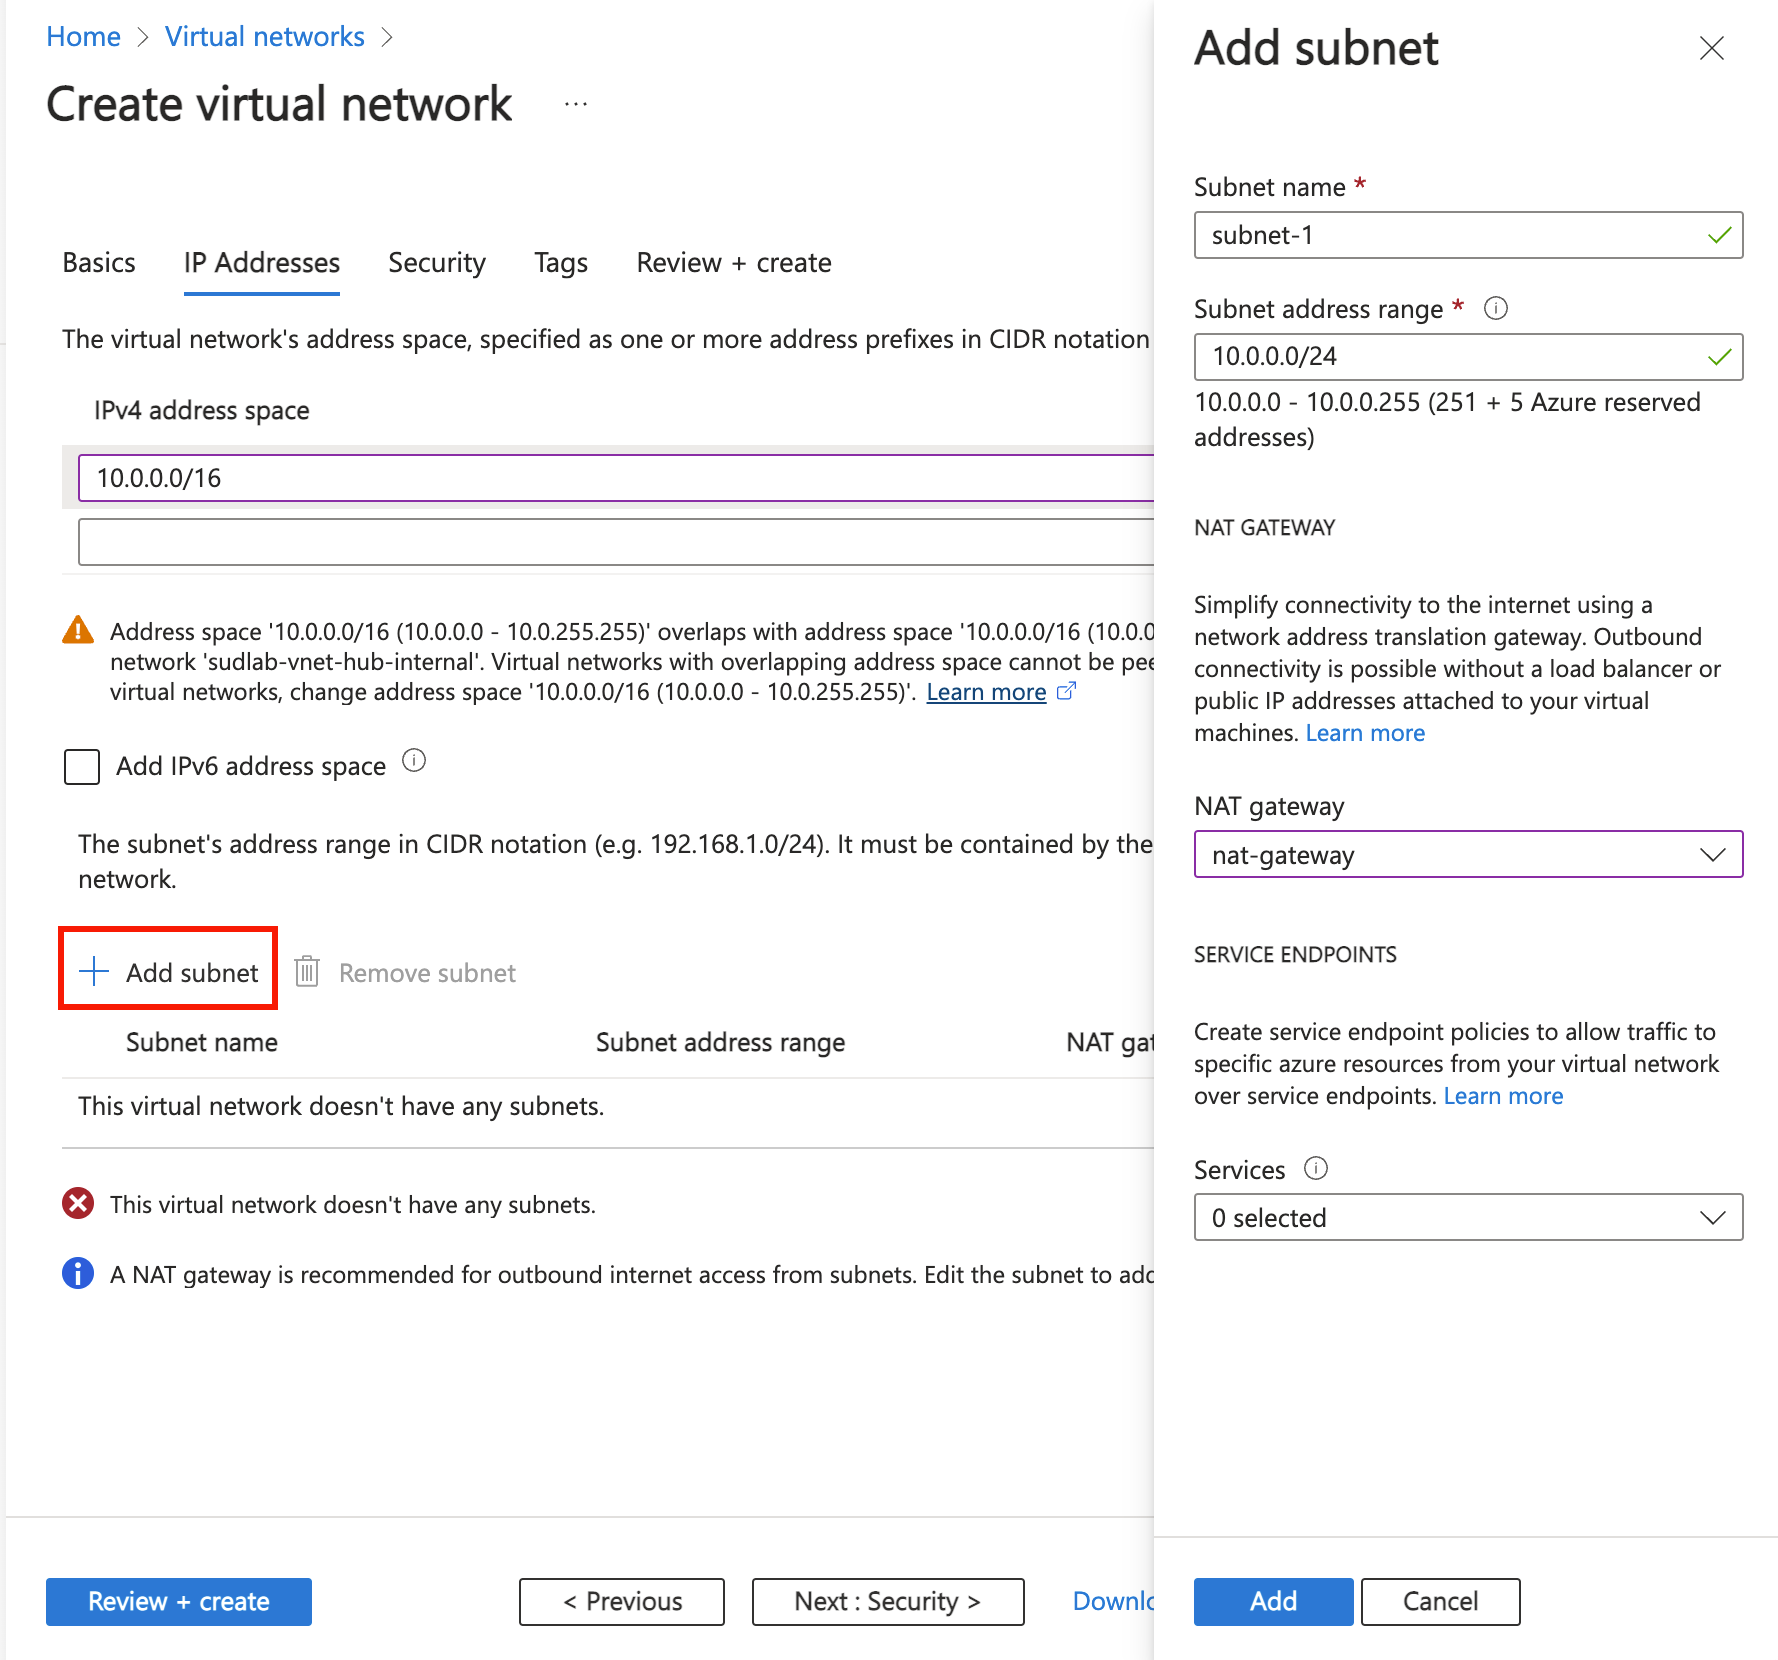 Screenshot of IP address space and subnet creation in Create virtual network in the Azure portal.